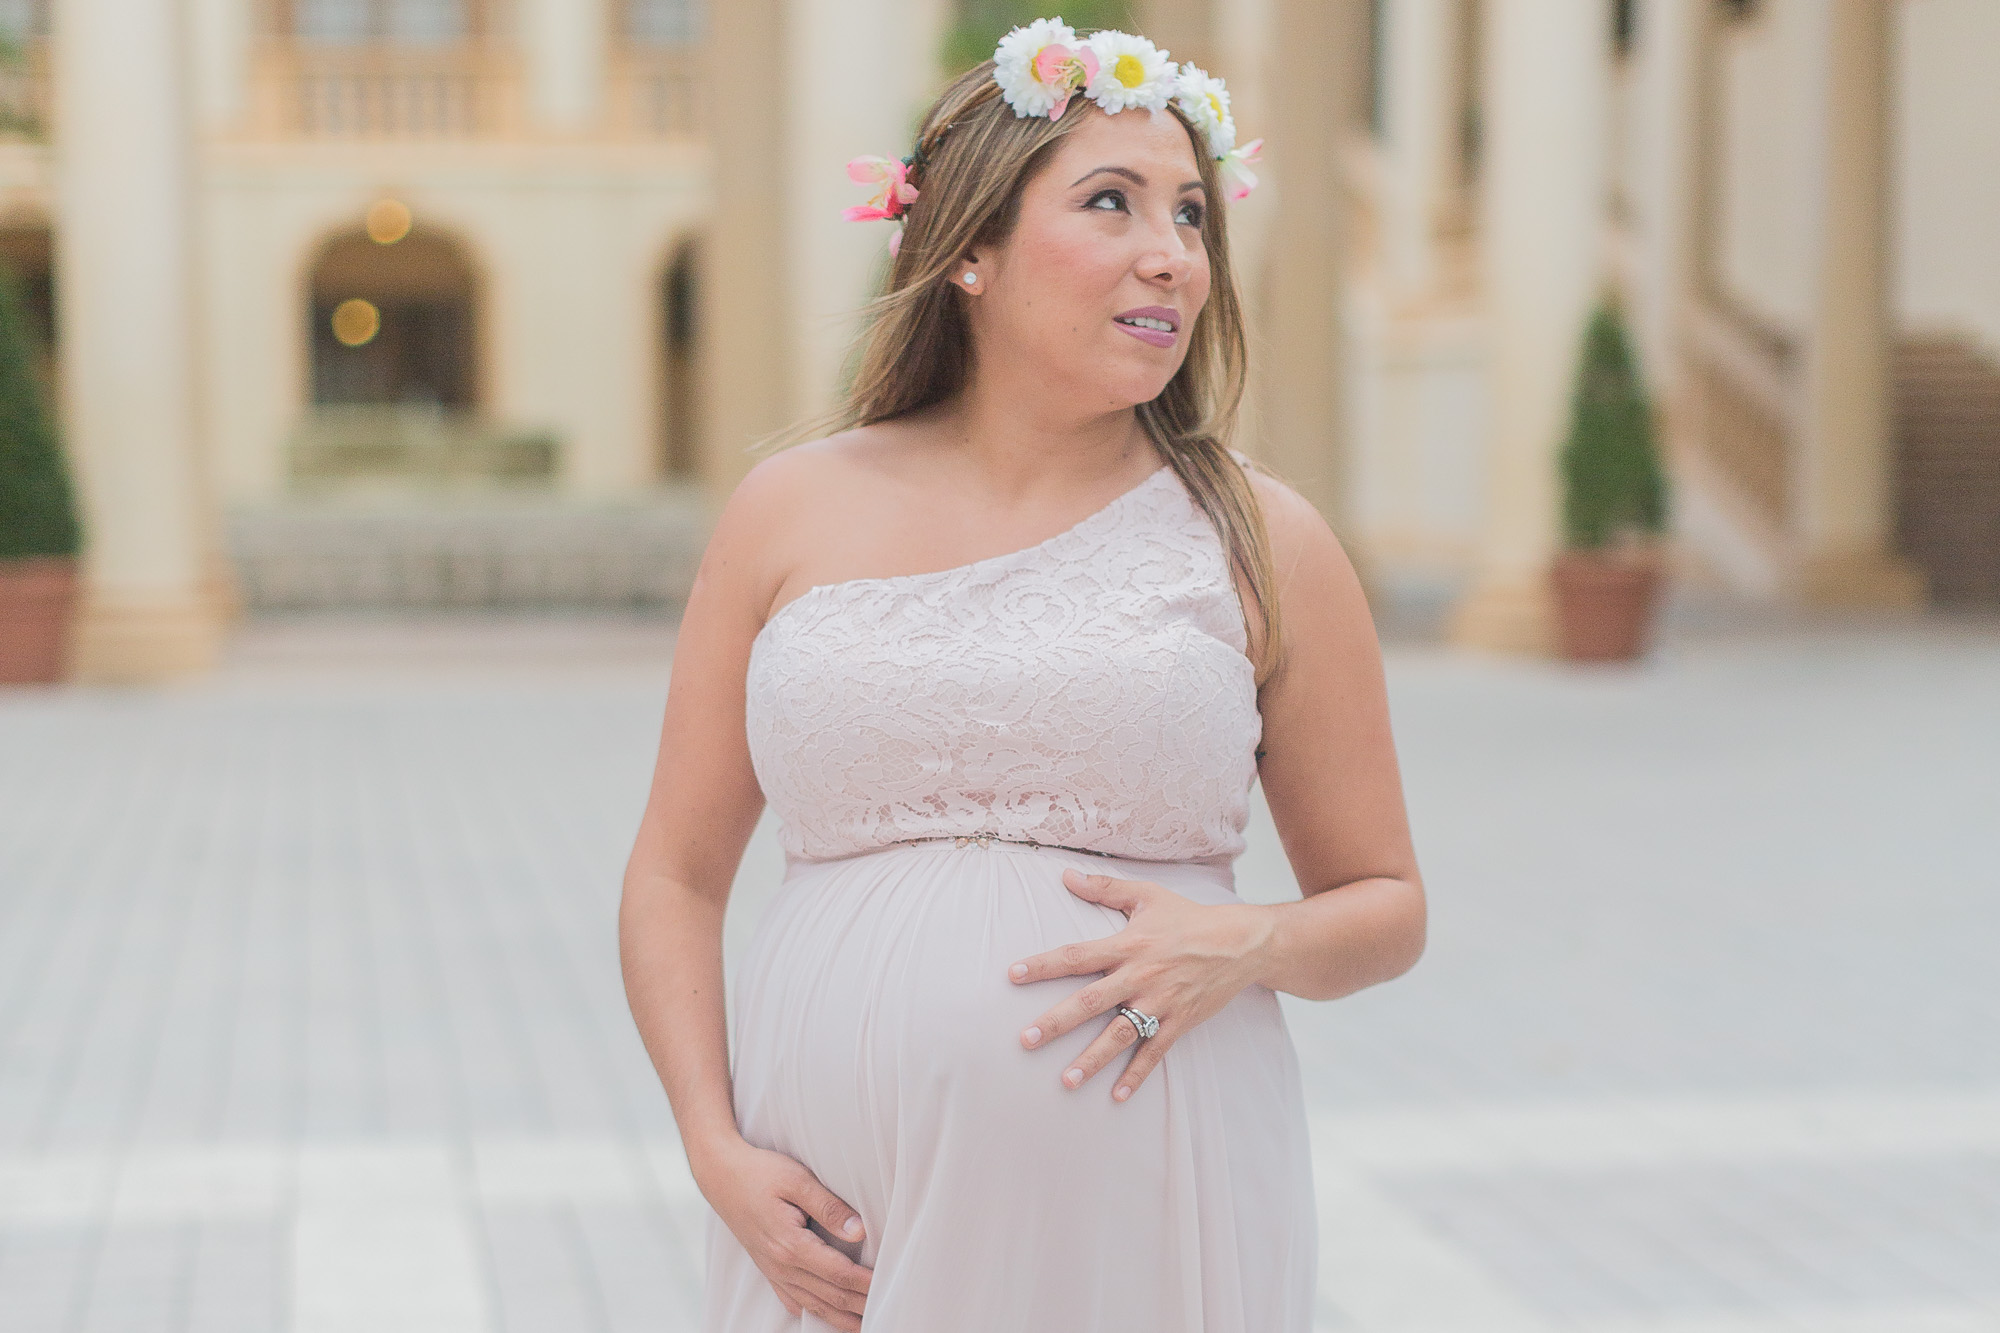 Evelyn: Pregnancy Photography Session at Biltmore Hotel, Coral Gables, Fl